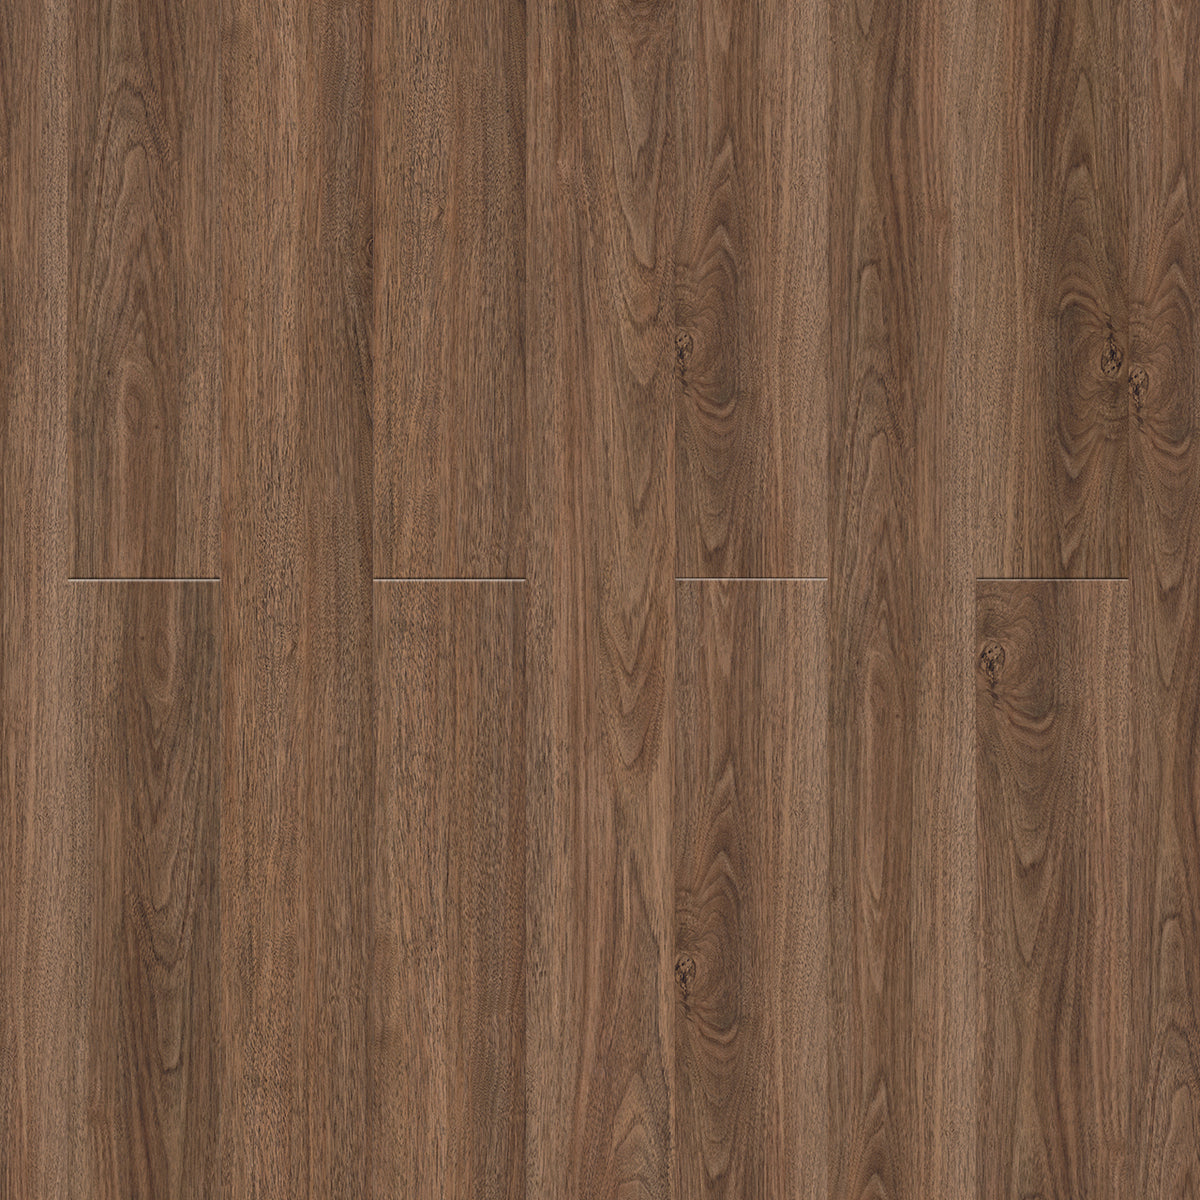 Engineered Floors - Triumph Collection - The New Standard II - 6 in. x 48 in. - Grand Cayman